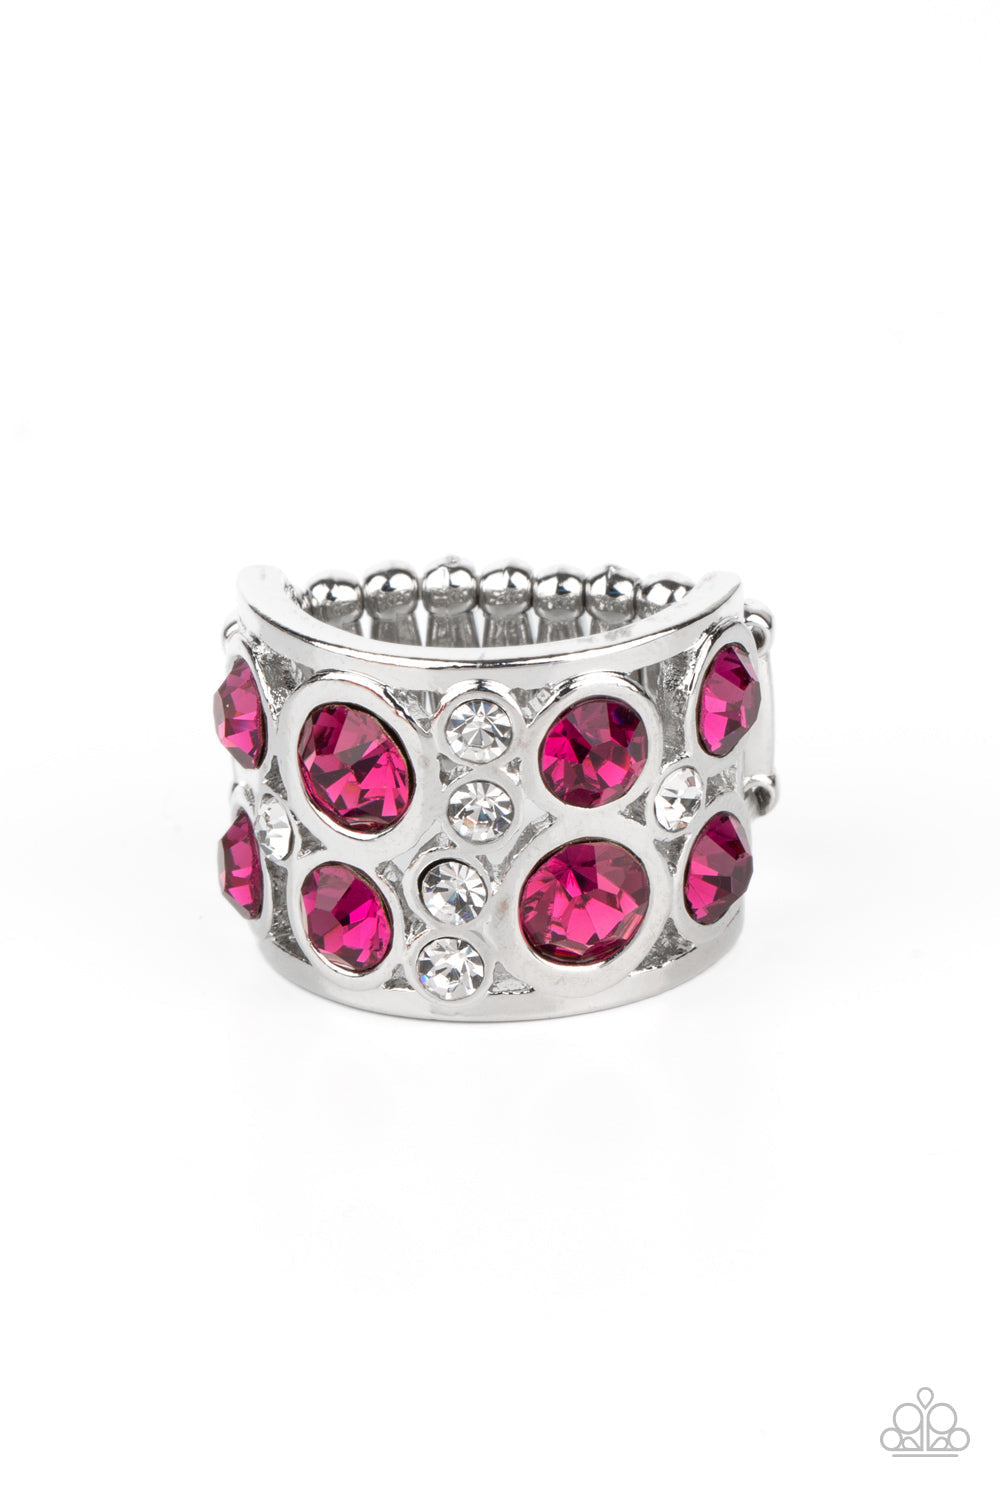 High Roller Royale - Pink and Silver Ring - Paparazzi Accessories - 
Sporadic sections of dainty white rhinestones and oversized pink rhinestones haphazardly coalesce inside an airy silver frame, creating a dramatically dazzling centerpiece around the finger. Features a stretchy band for a flexible fit. Sold as one individual ring.
